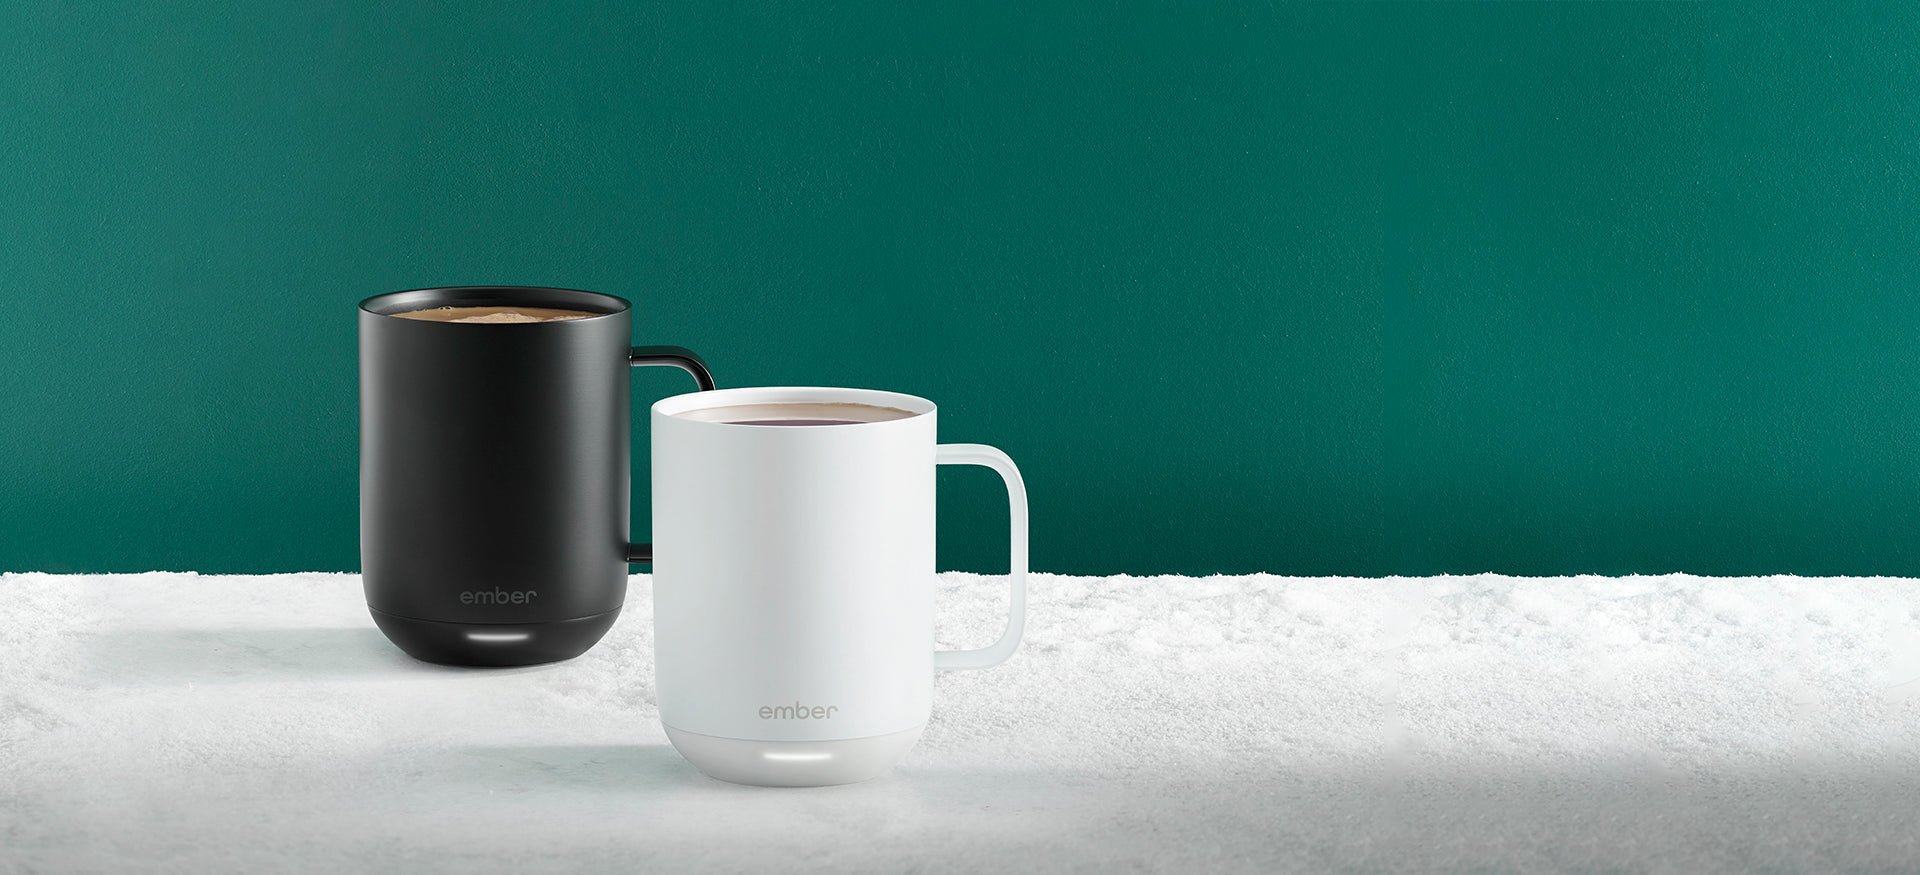 s Black Friday sale has Ember Smart Mugs for record-low prices